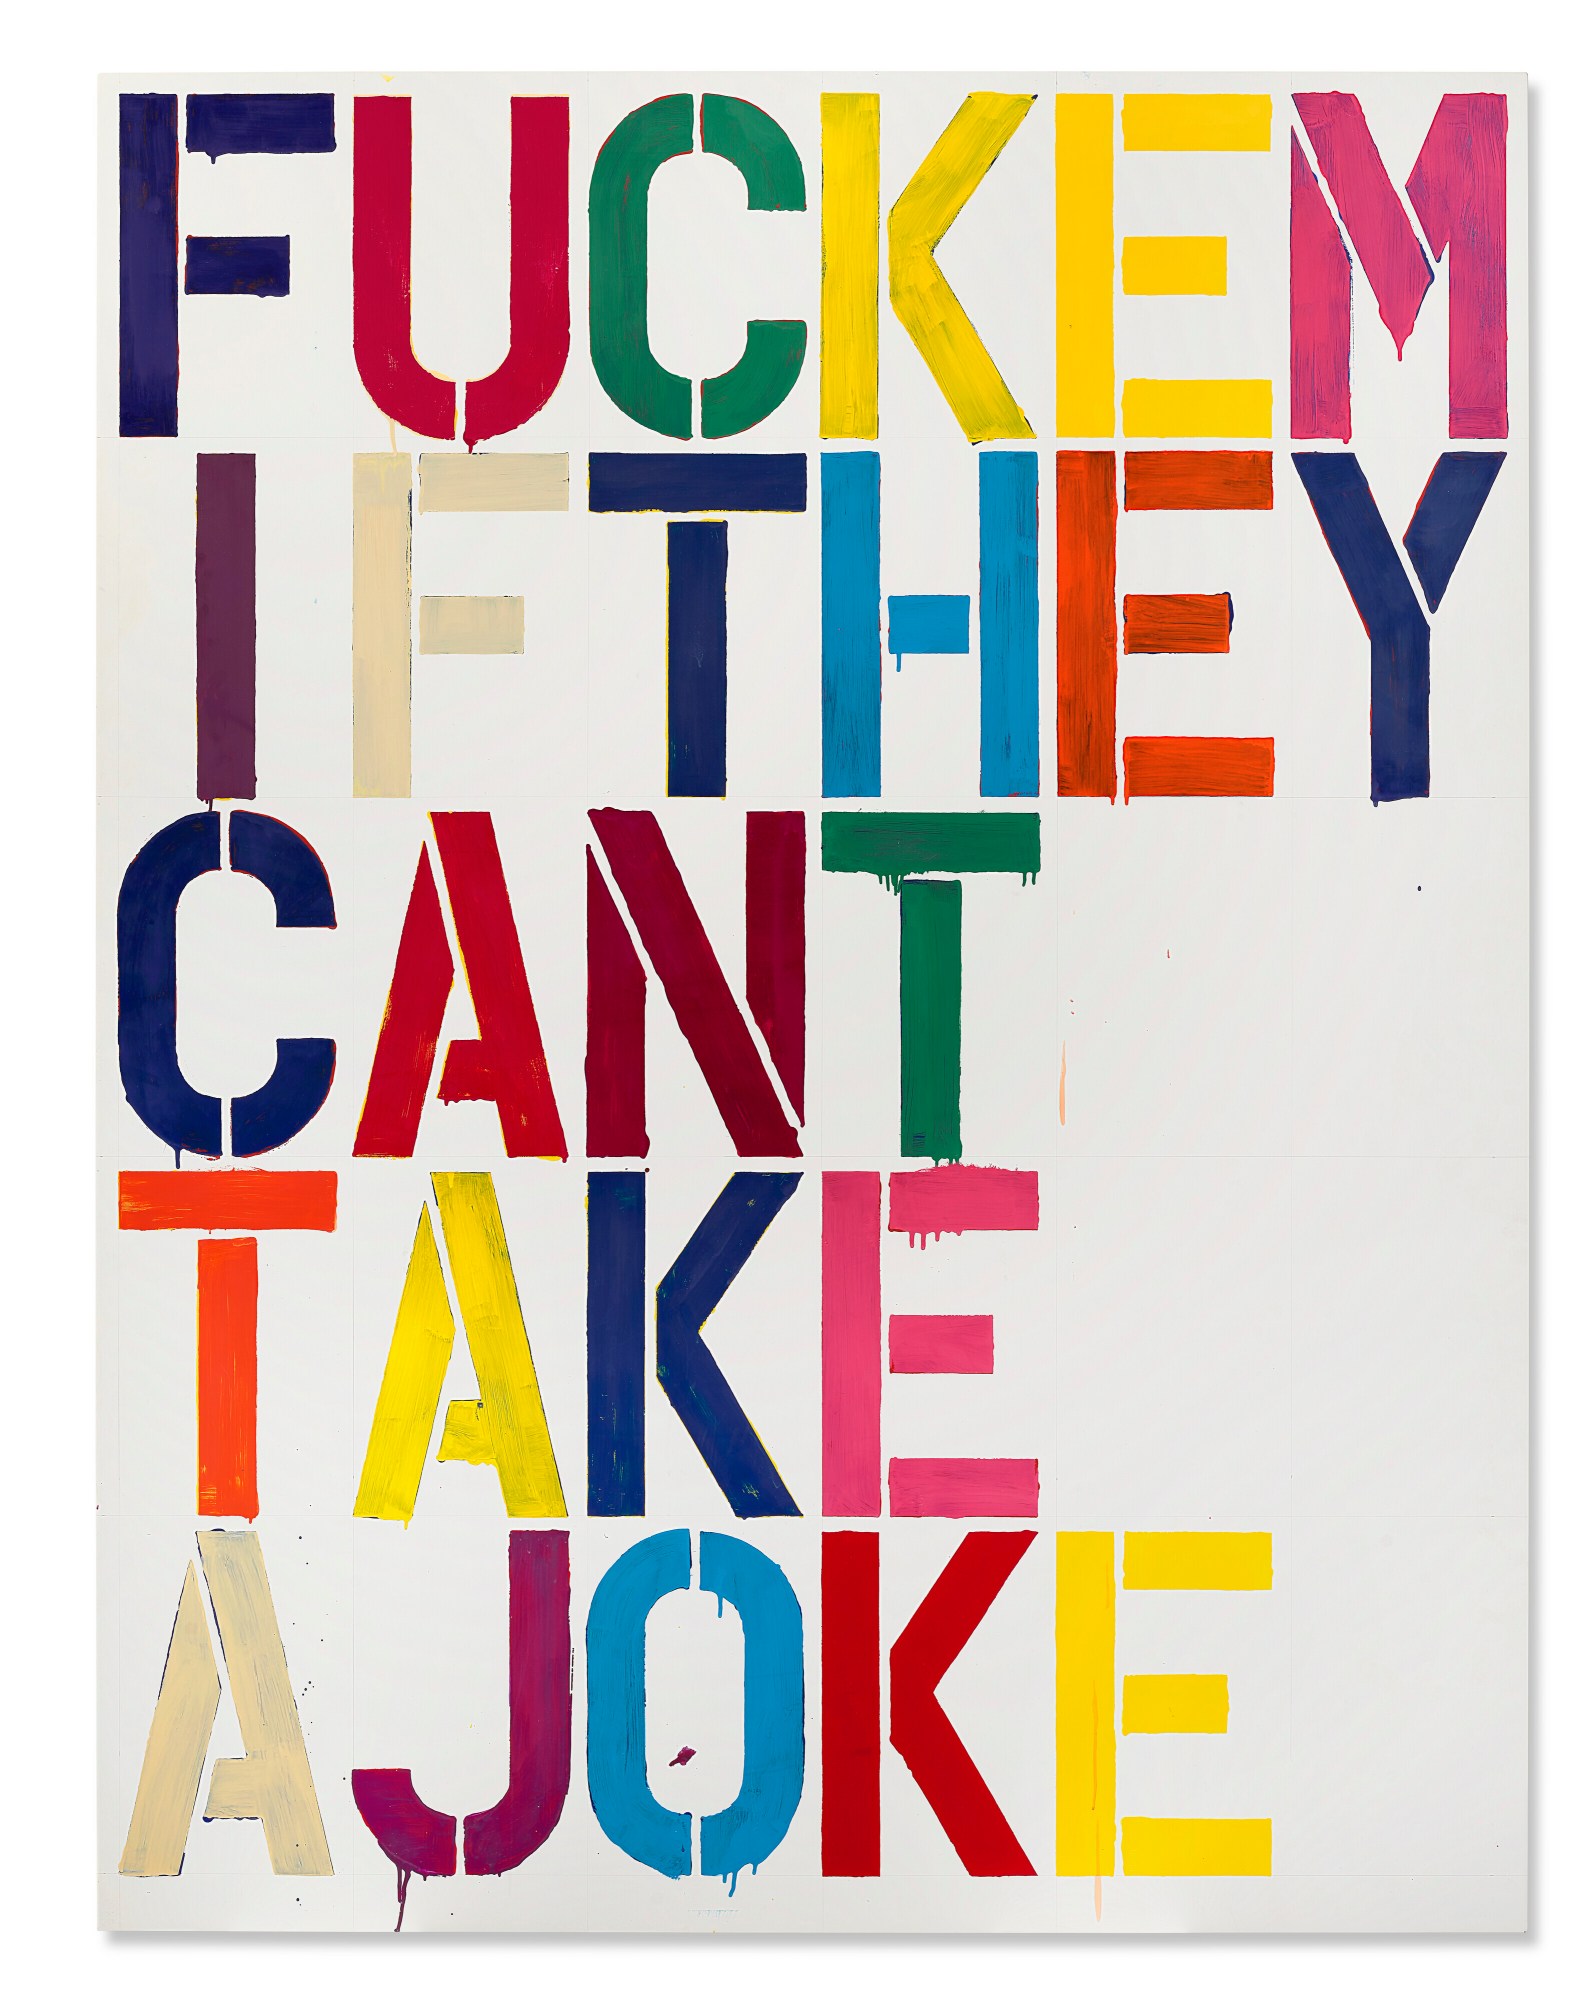 A work by Christopher Wool that says "FUCK THEM IF THEY CANT TAKE A JOKE" in colorful letters